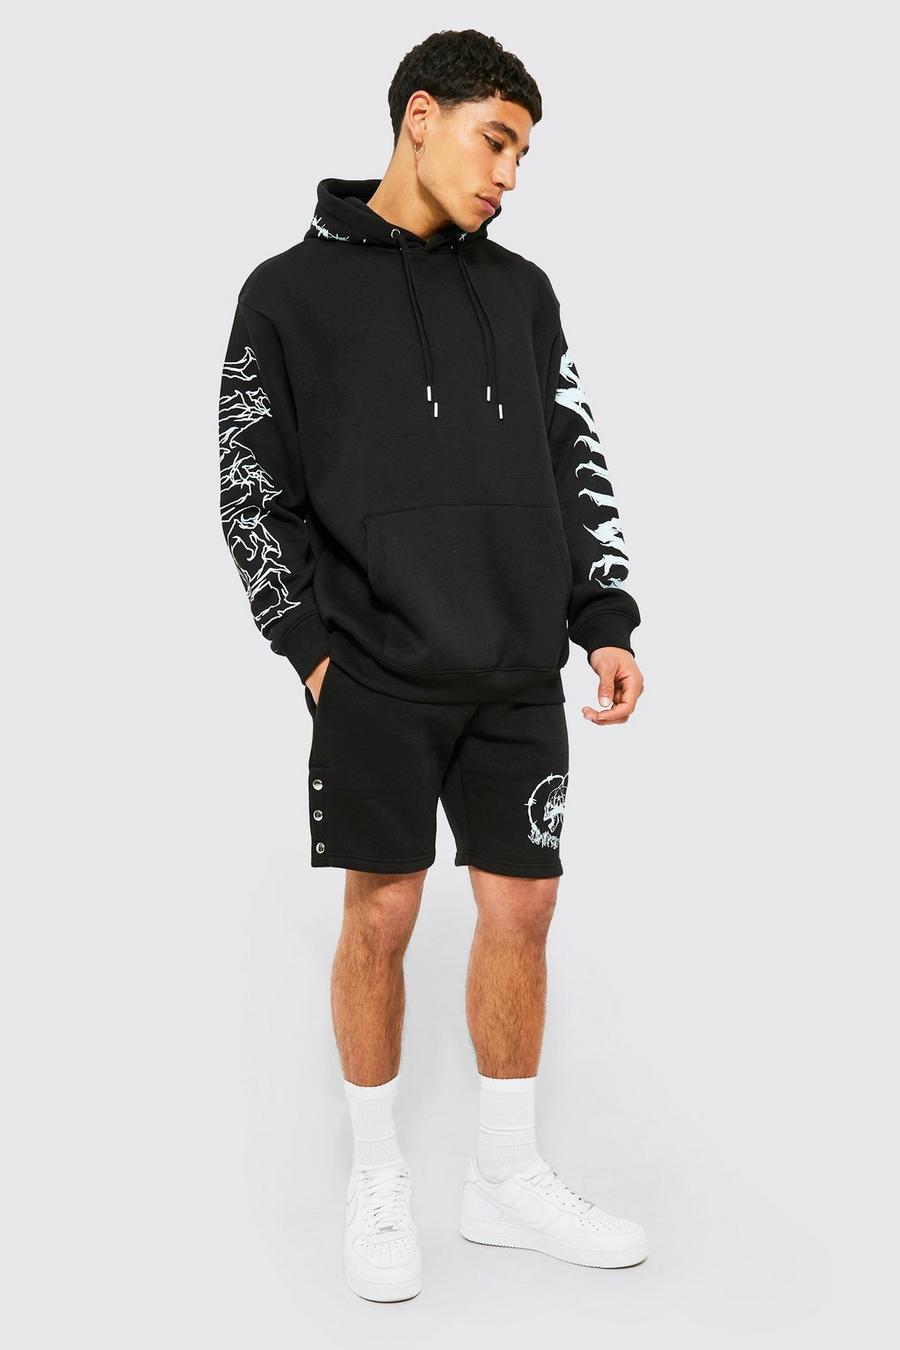 Black Oversized Barbed Wire Hoodie & Popper Short